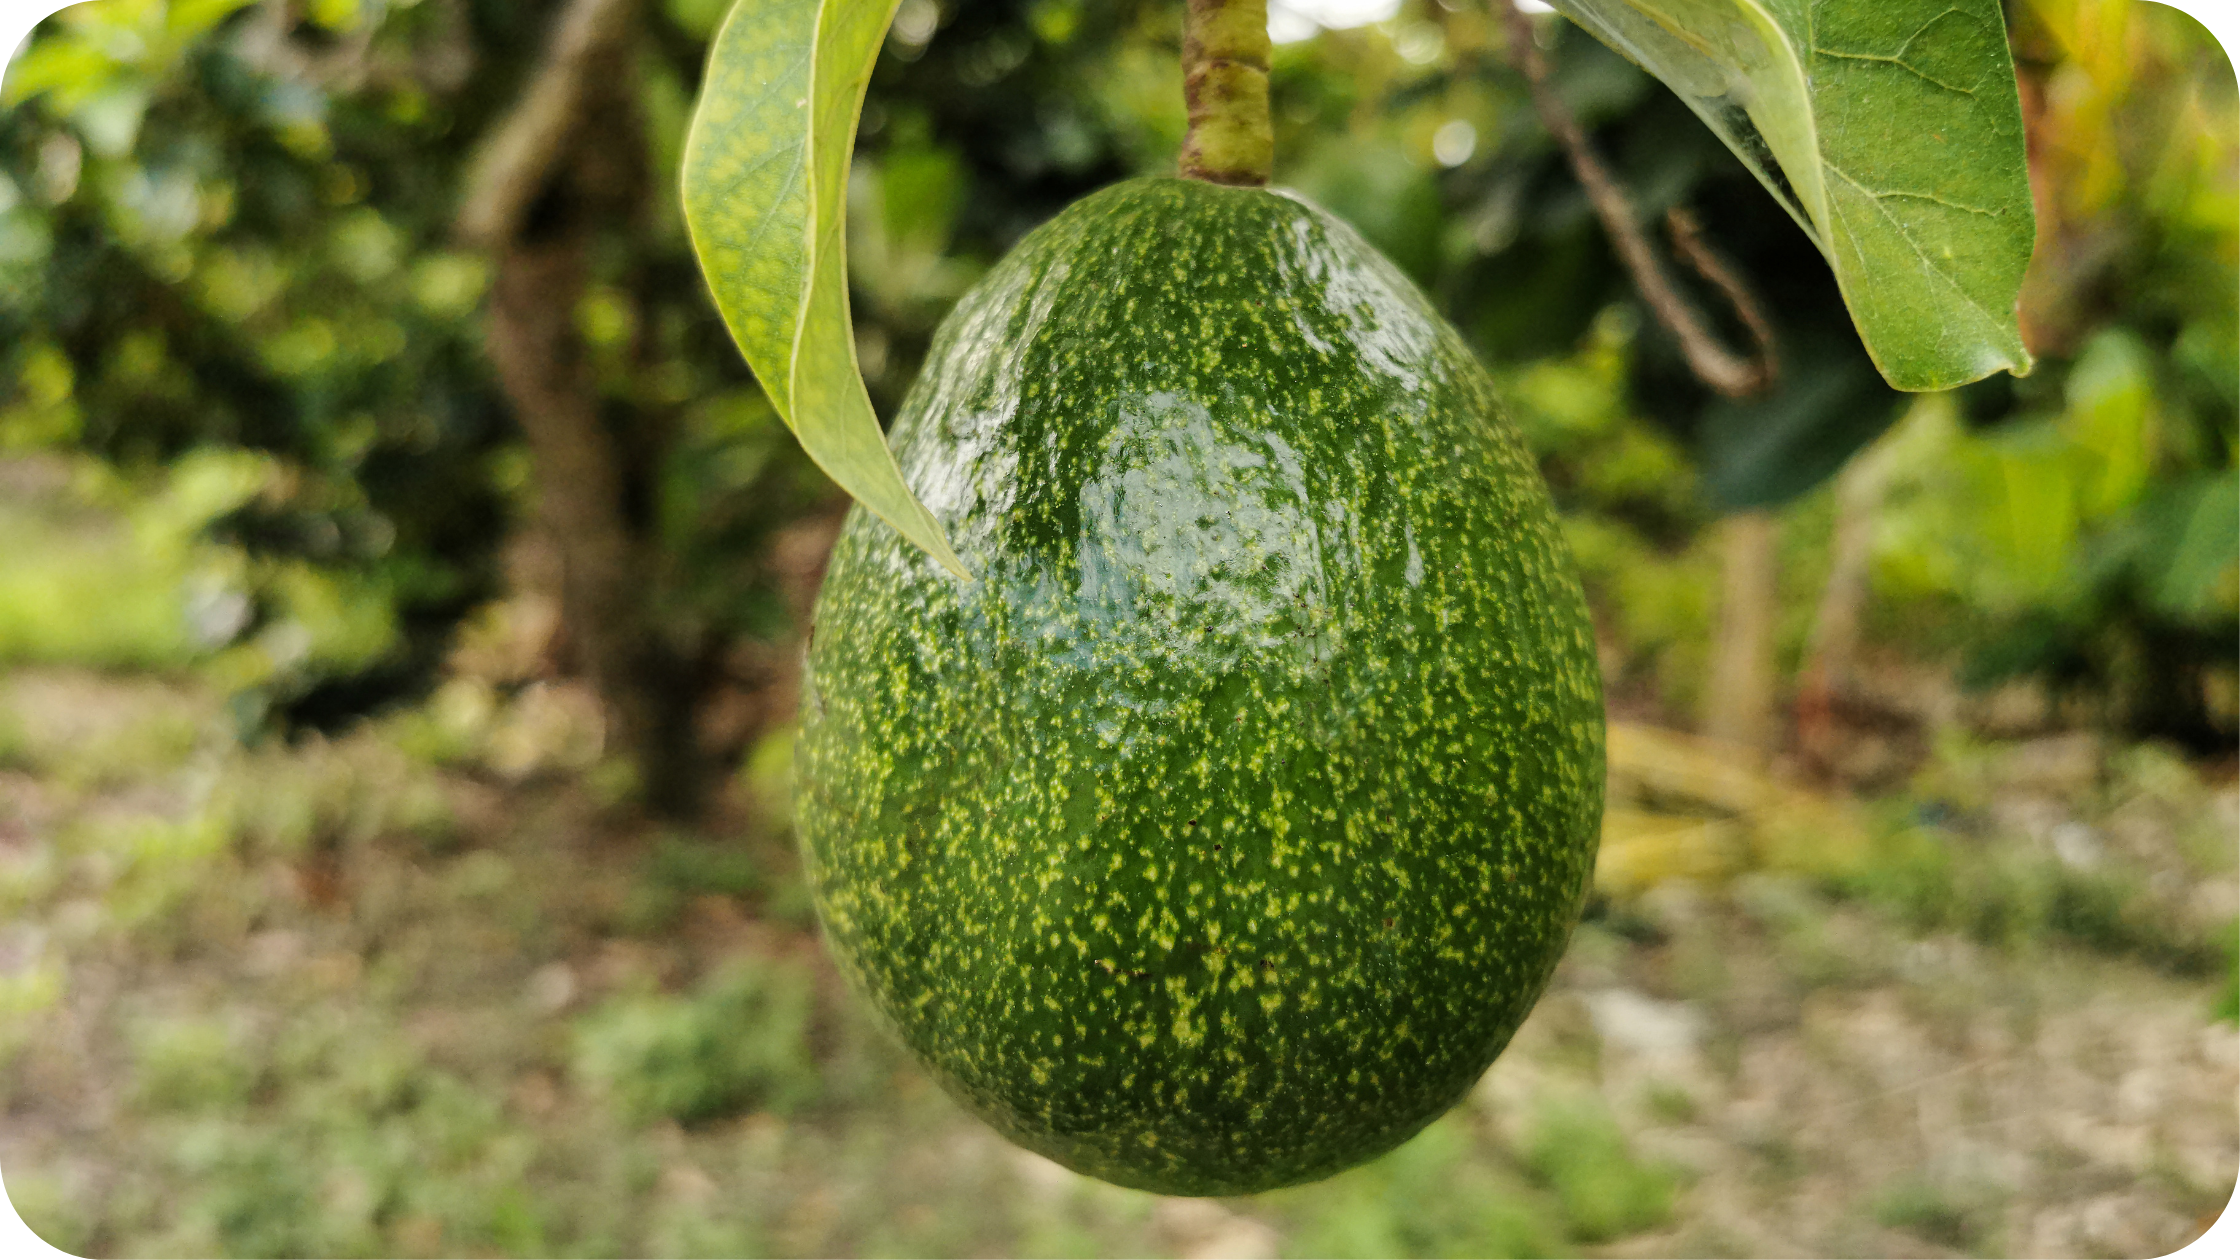 Your Daily Avocado Habit Is Posing A Major Threat To Environmental Sustainability